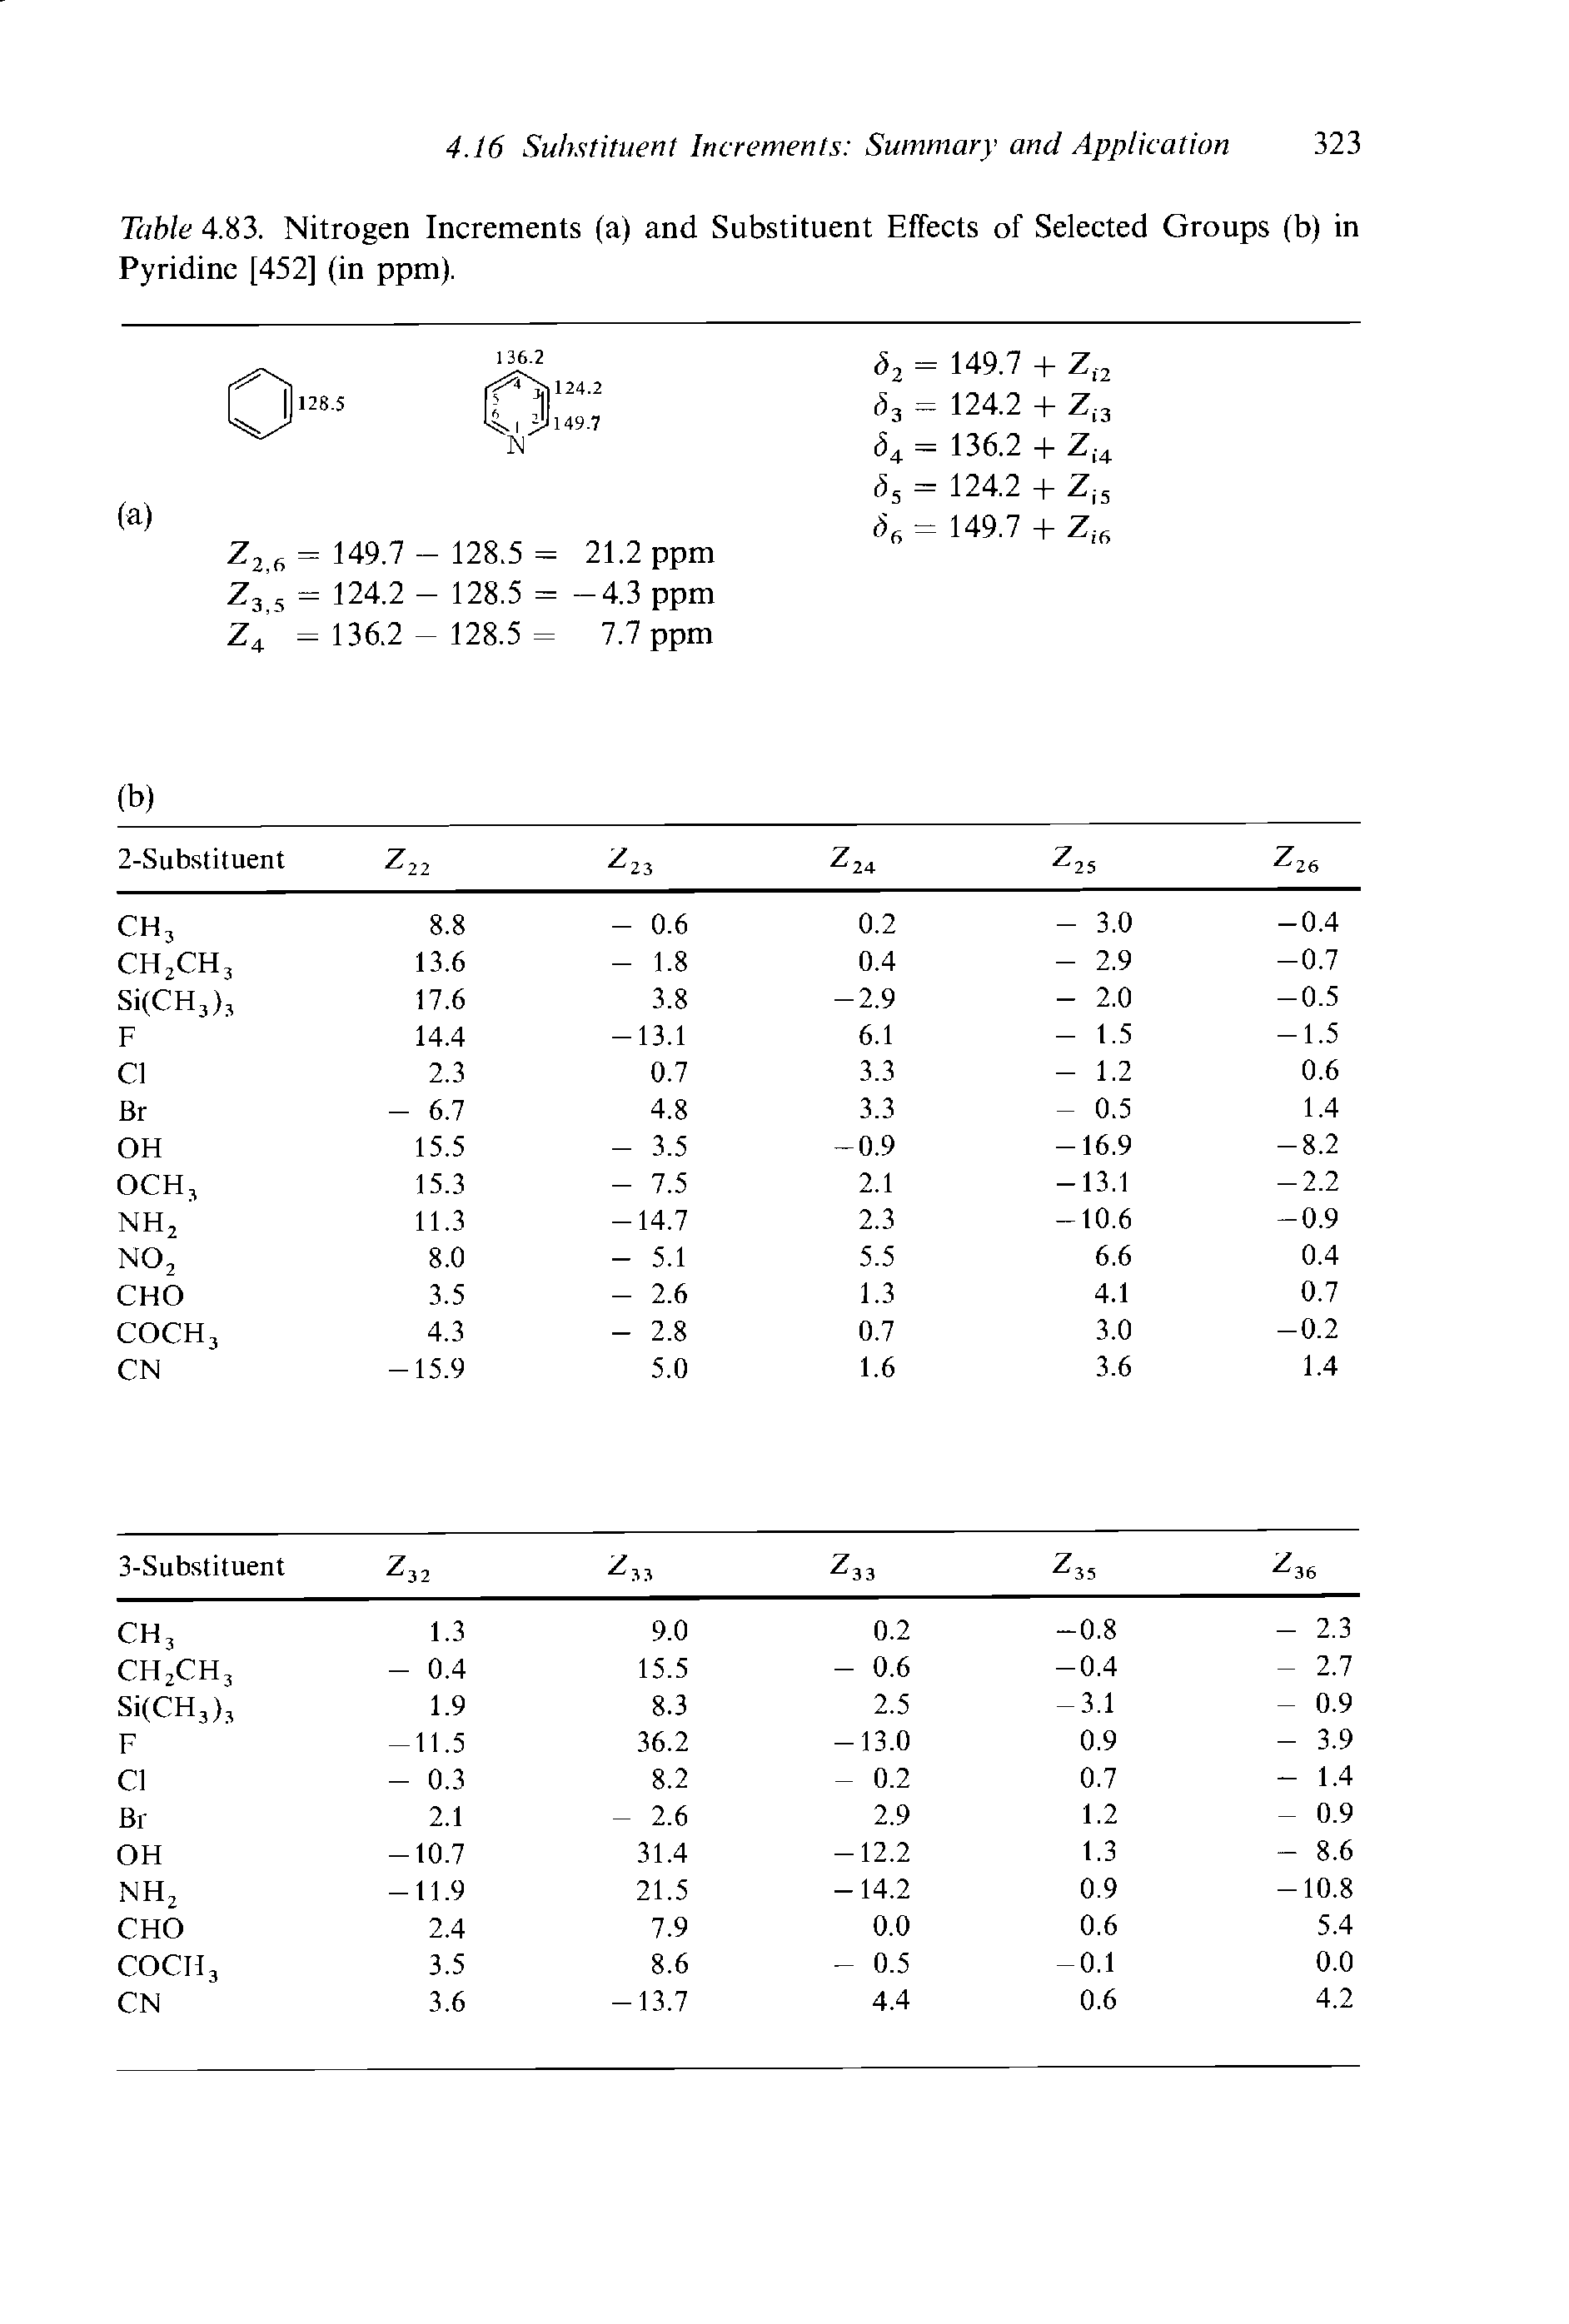 Table 4.83. Nitrogen Increments (a) and Substituent Effects of Selected Groups (b) in Pyridine [452] (in ppm).